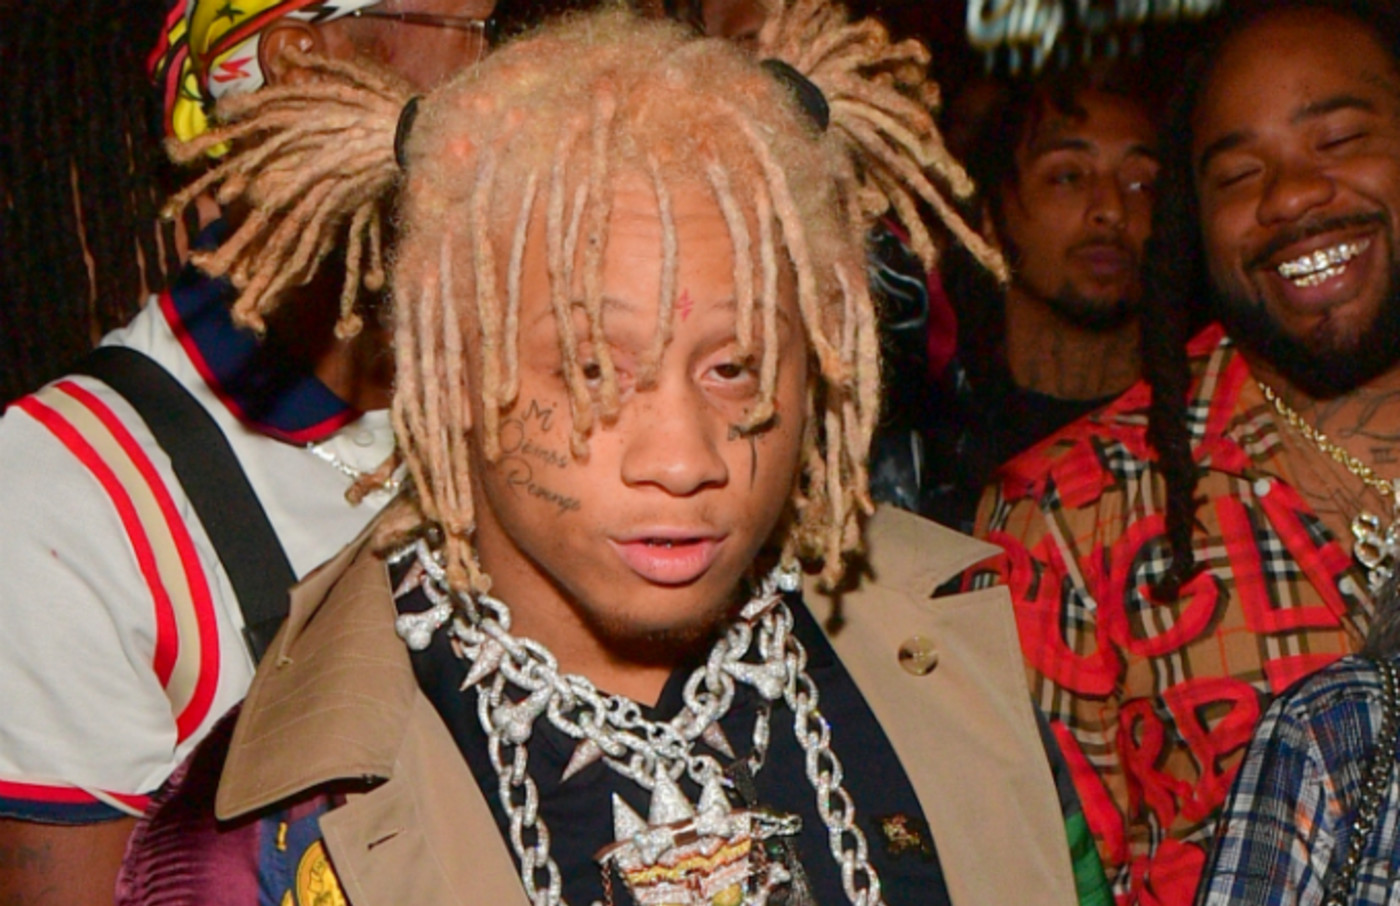 Evakuering nøgle offentlig Everything You Need To Know About Trippie Redd | Complex